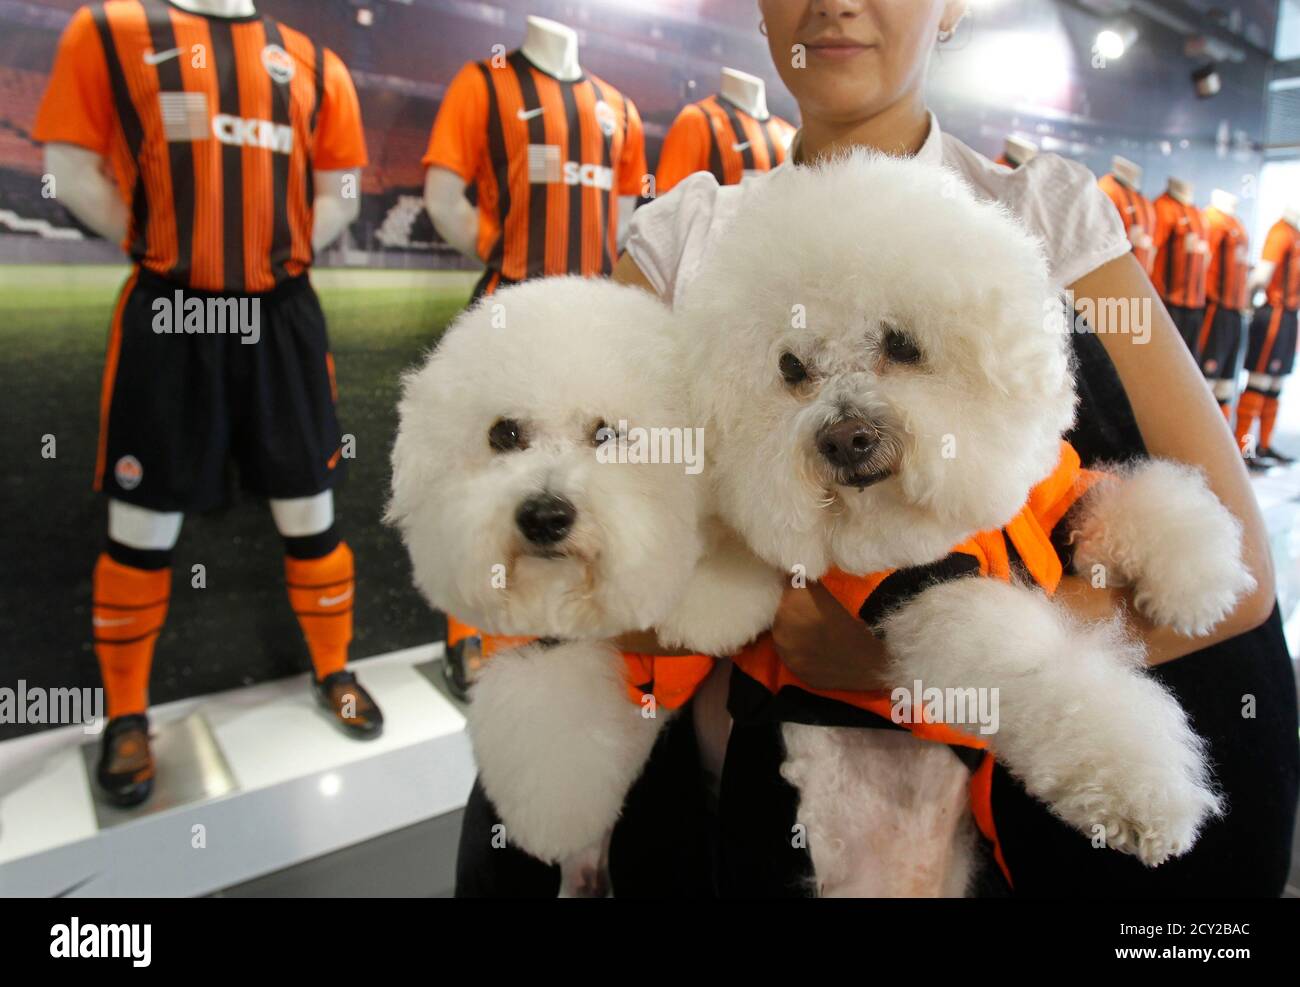 A visitor with two Bichon Frise dogs, dressed in Ukraine's top division  soccer club's Shakhtar Donetsk t-shirts walks in the fan shop at their home  ground, Donbass Arena, in Donetsk, September 1,